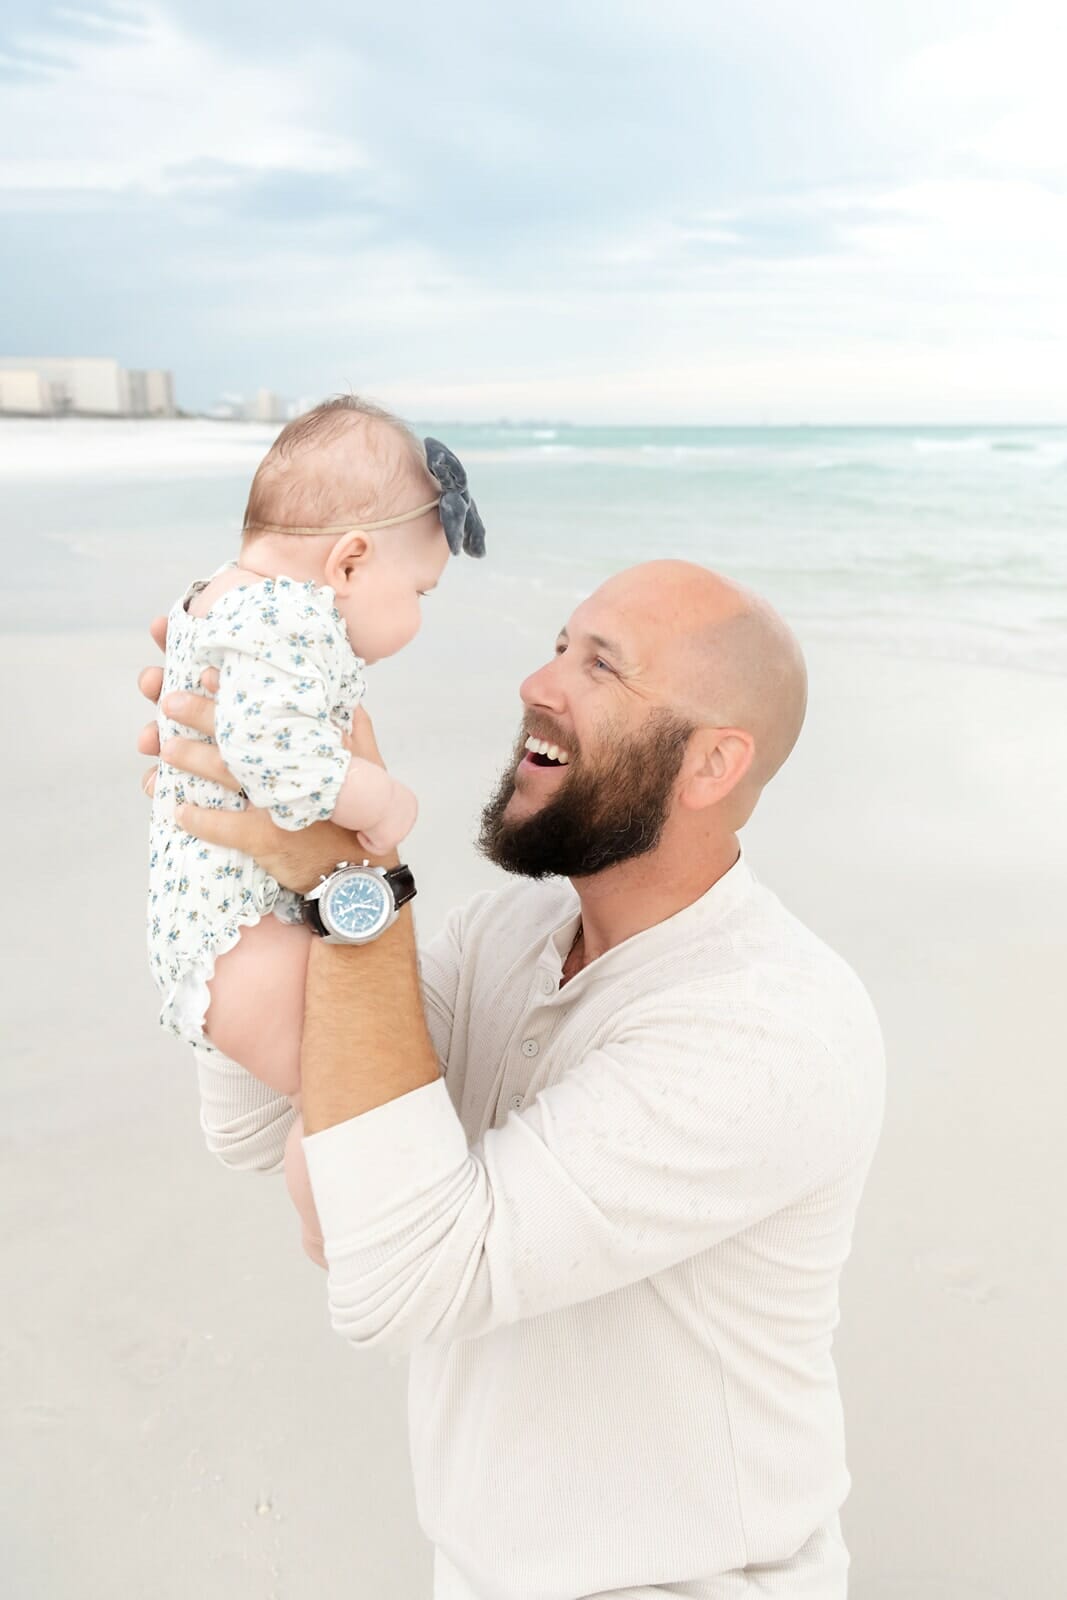 A man holding a baby on the beach.